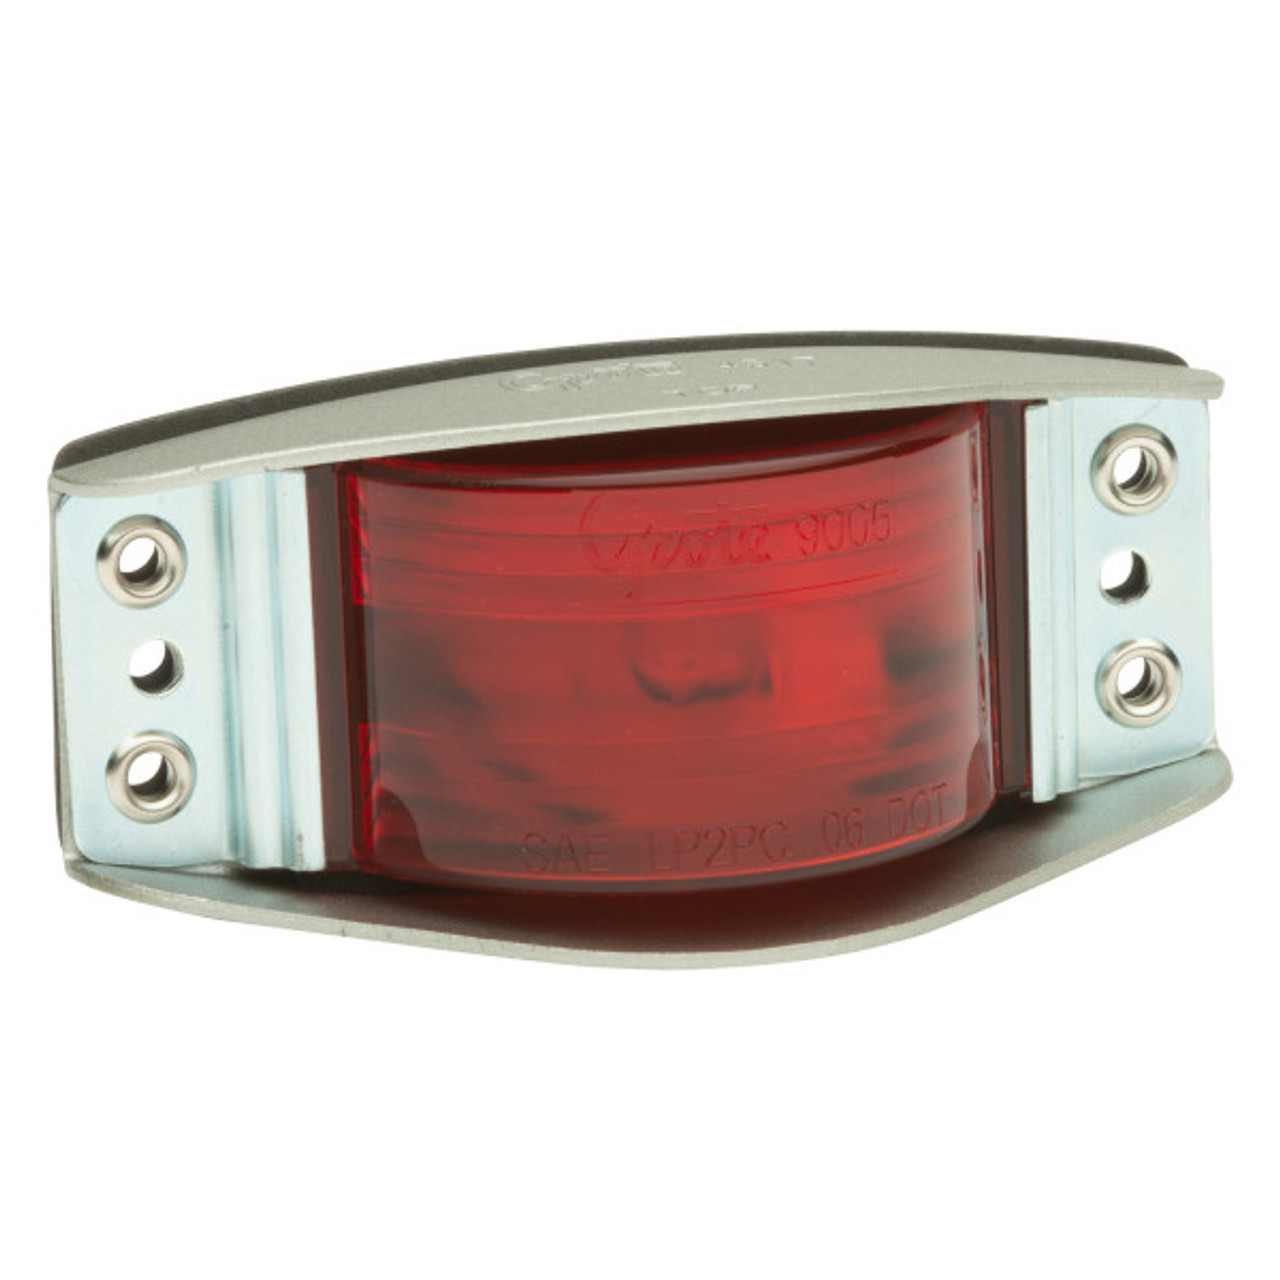 Grote 45172 Narrow Rail Clearance / Marker Lamp- Red, Steel Bracket, 4.5"- Incandescent